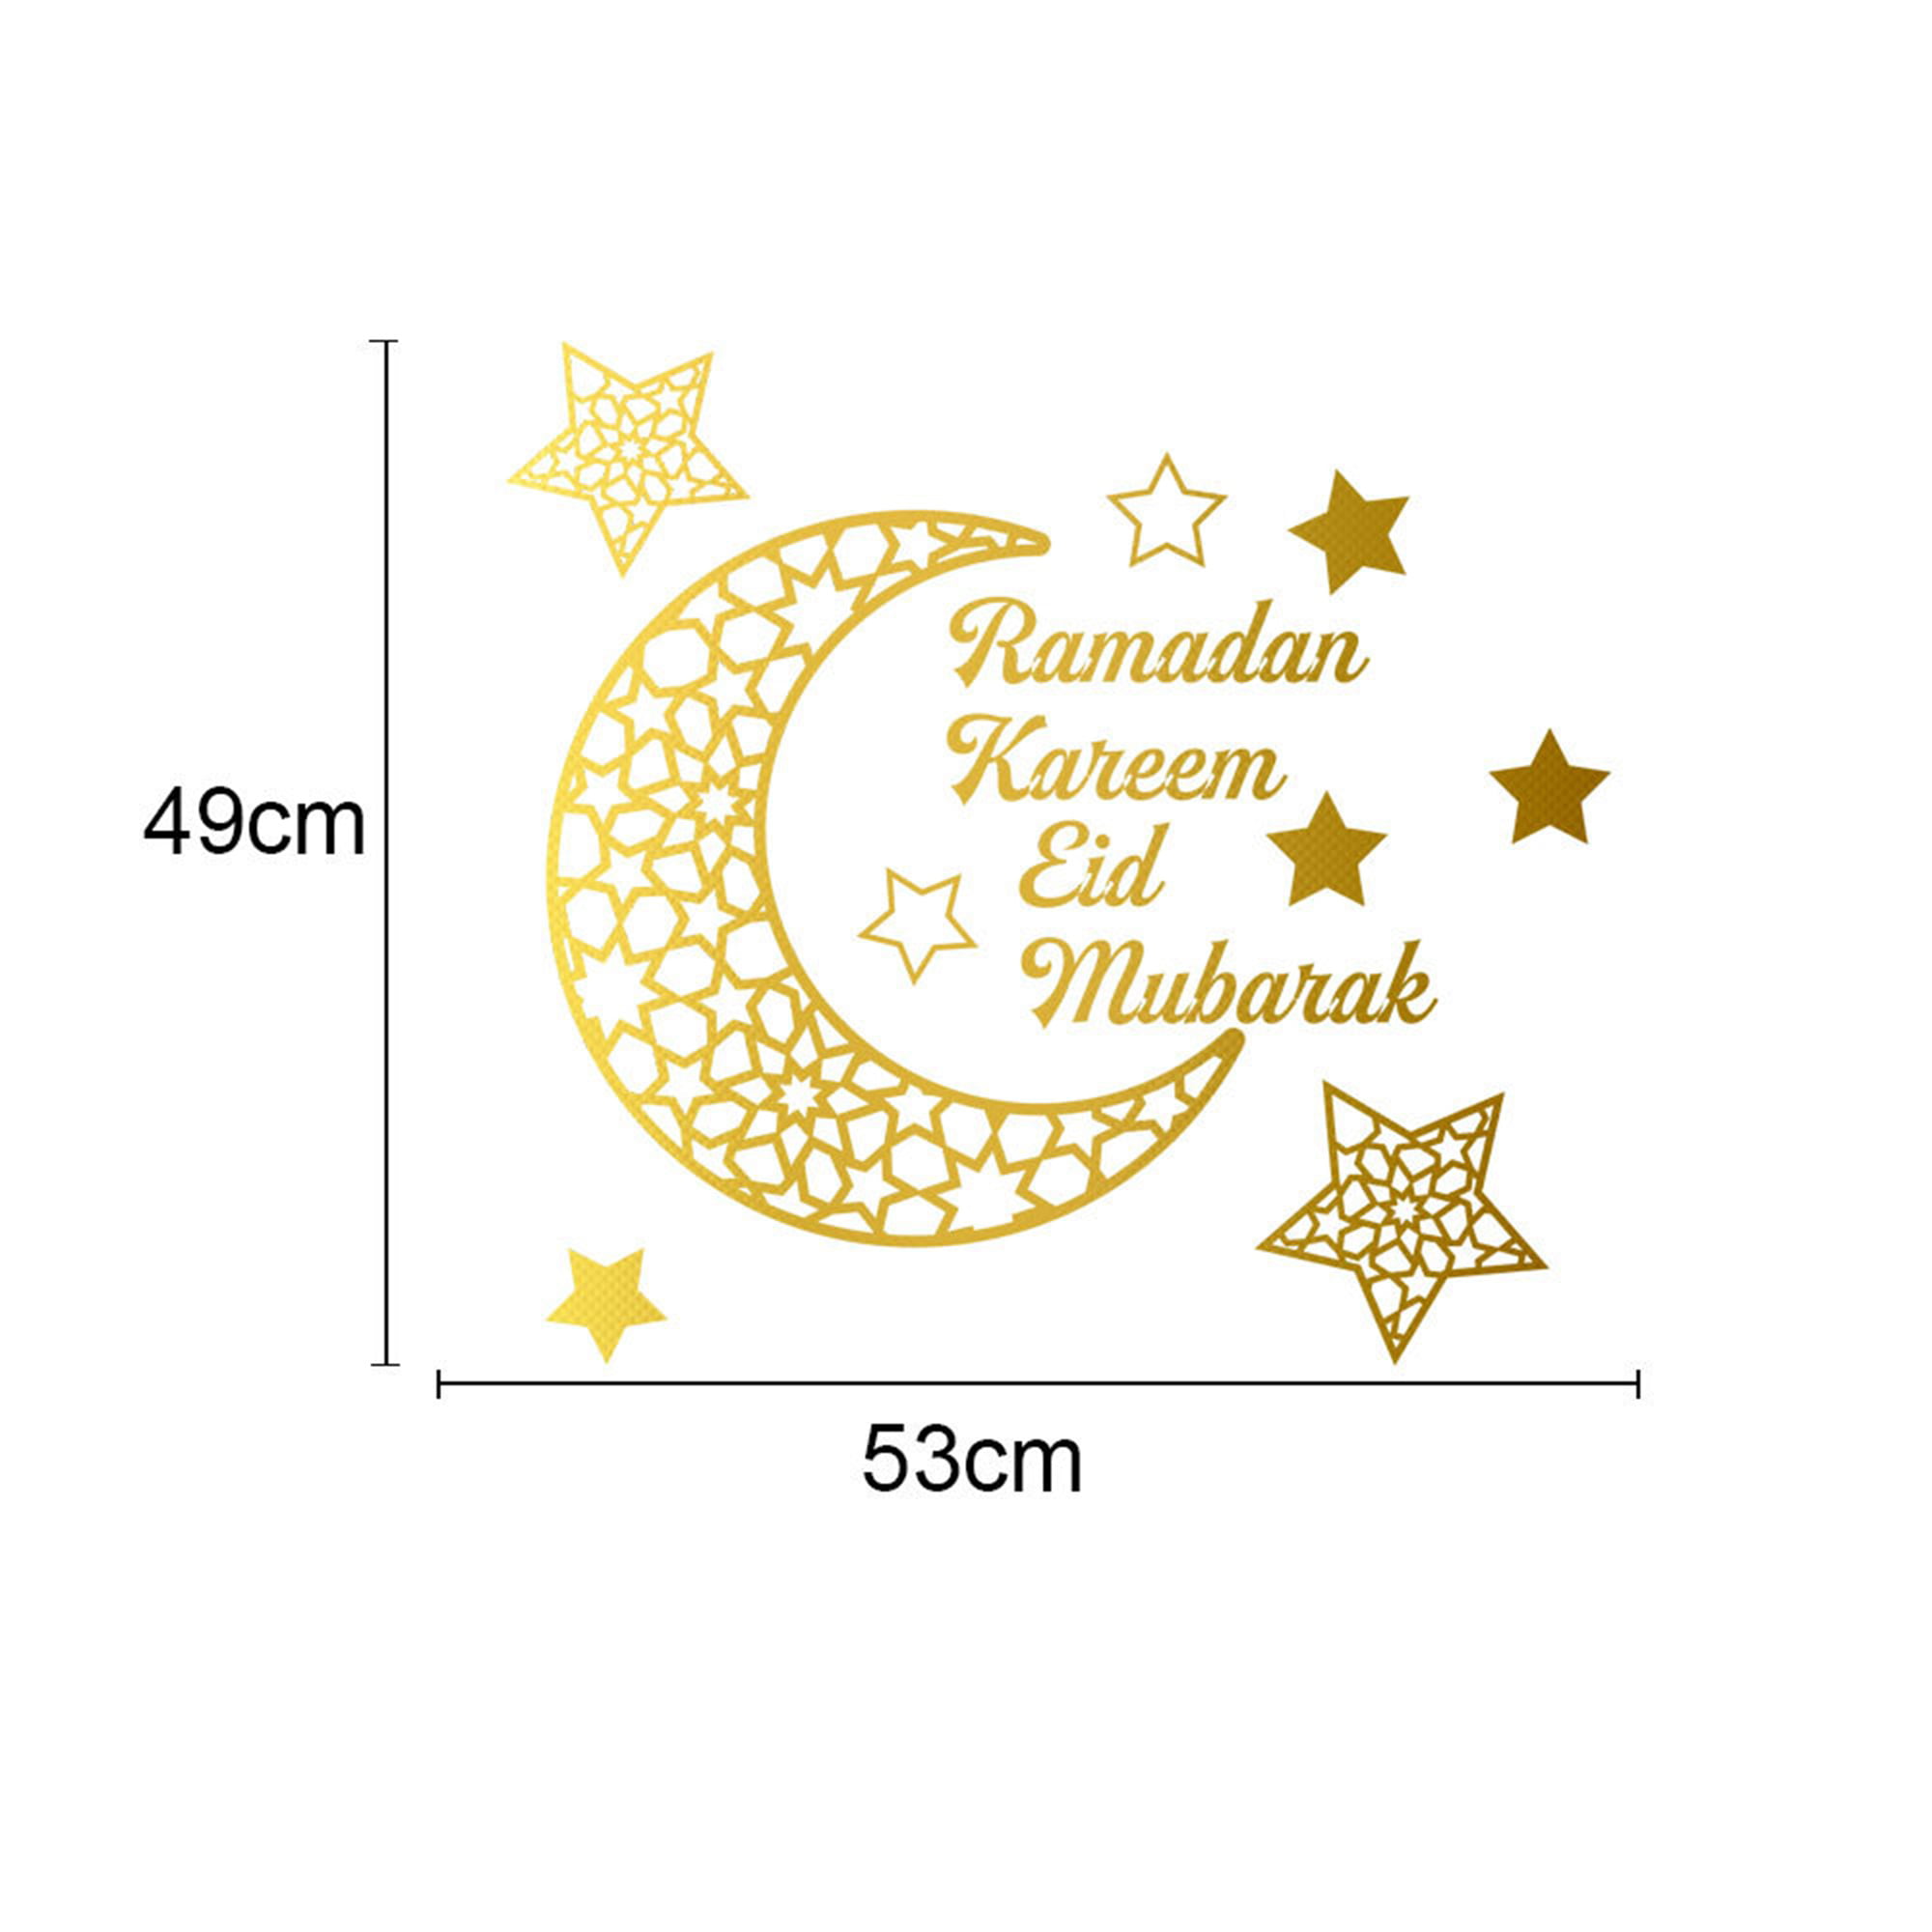 2 x Eid Mubarak Vinyl Decal Sticker for Glass Cup Card Gift Party decoration DIY